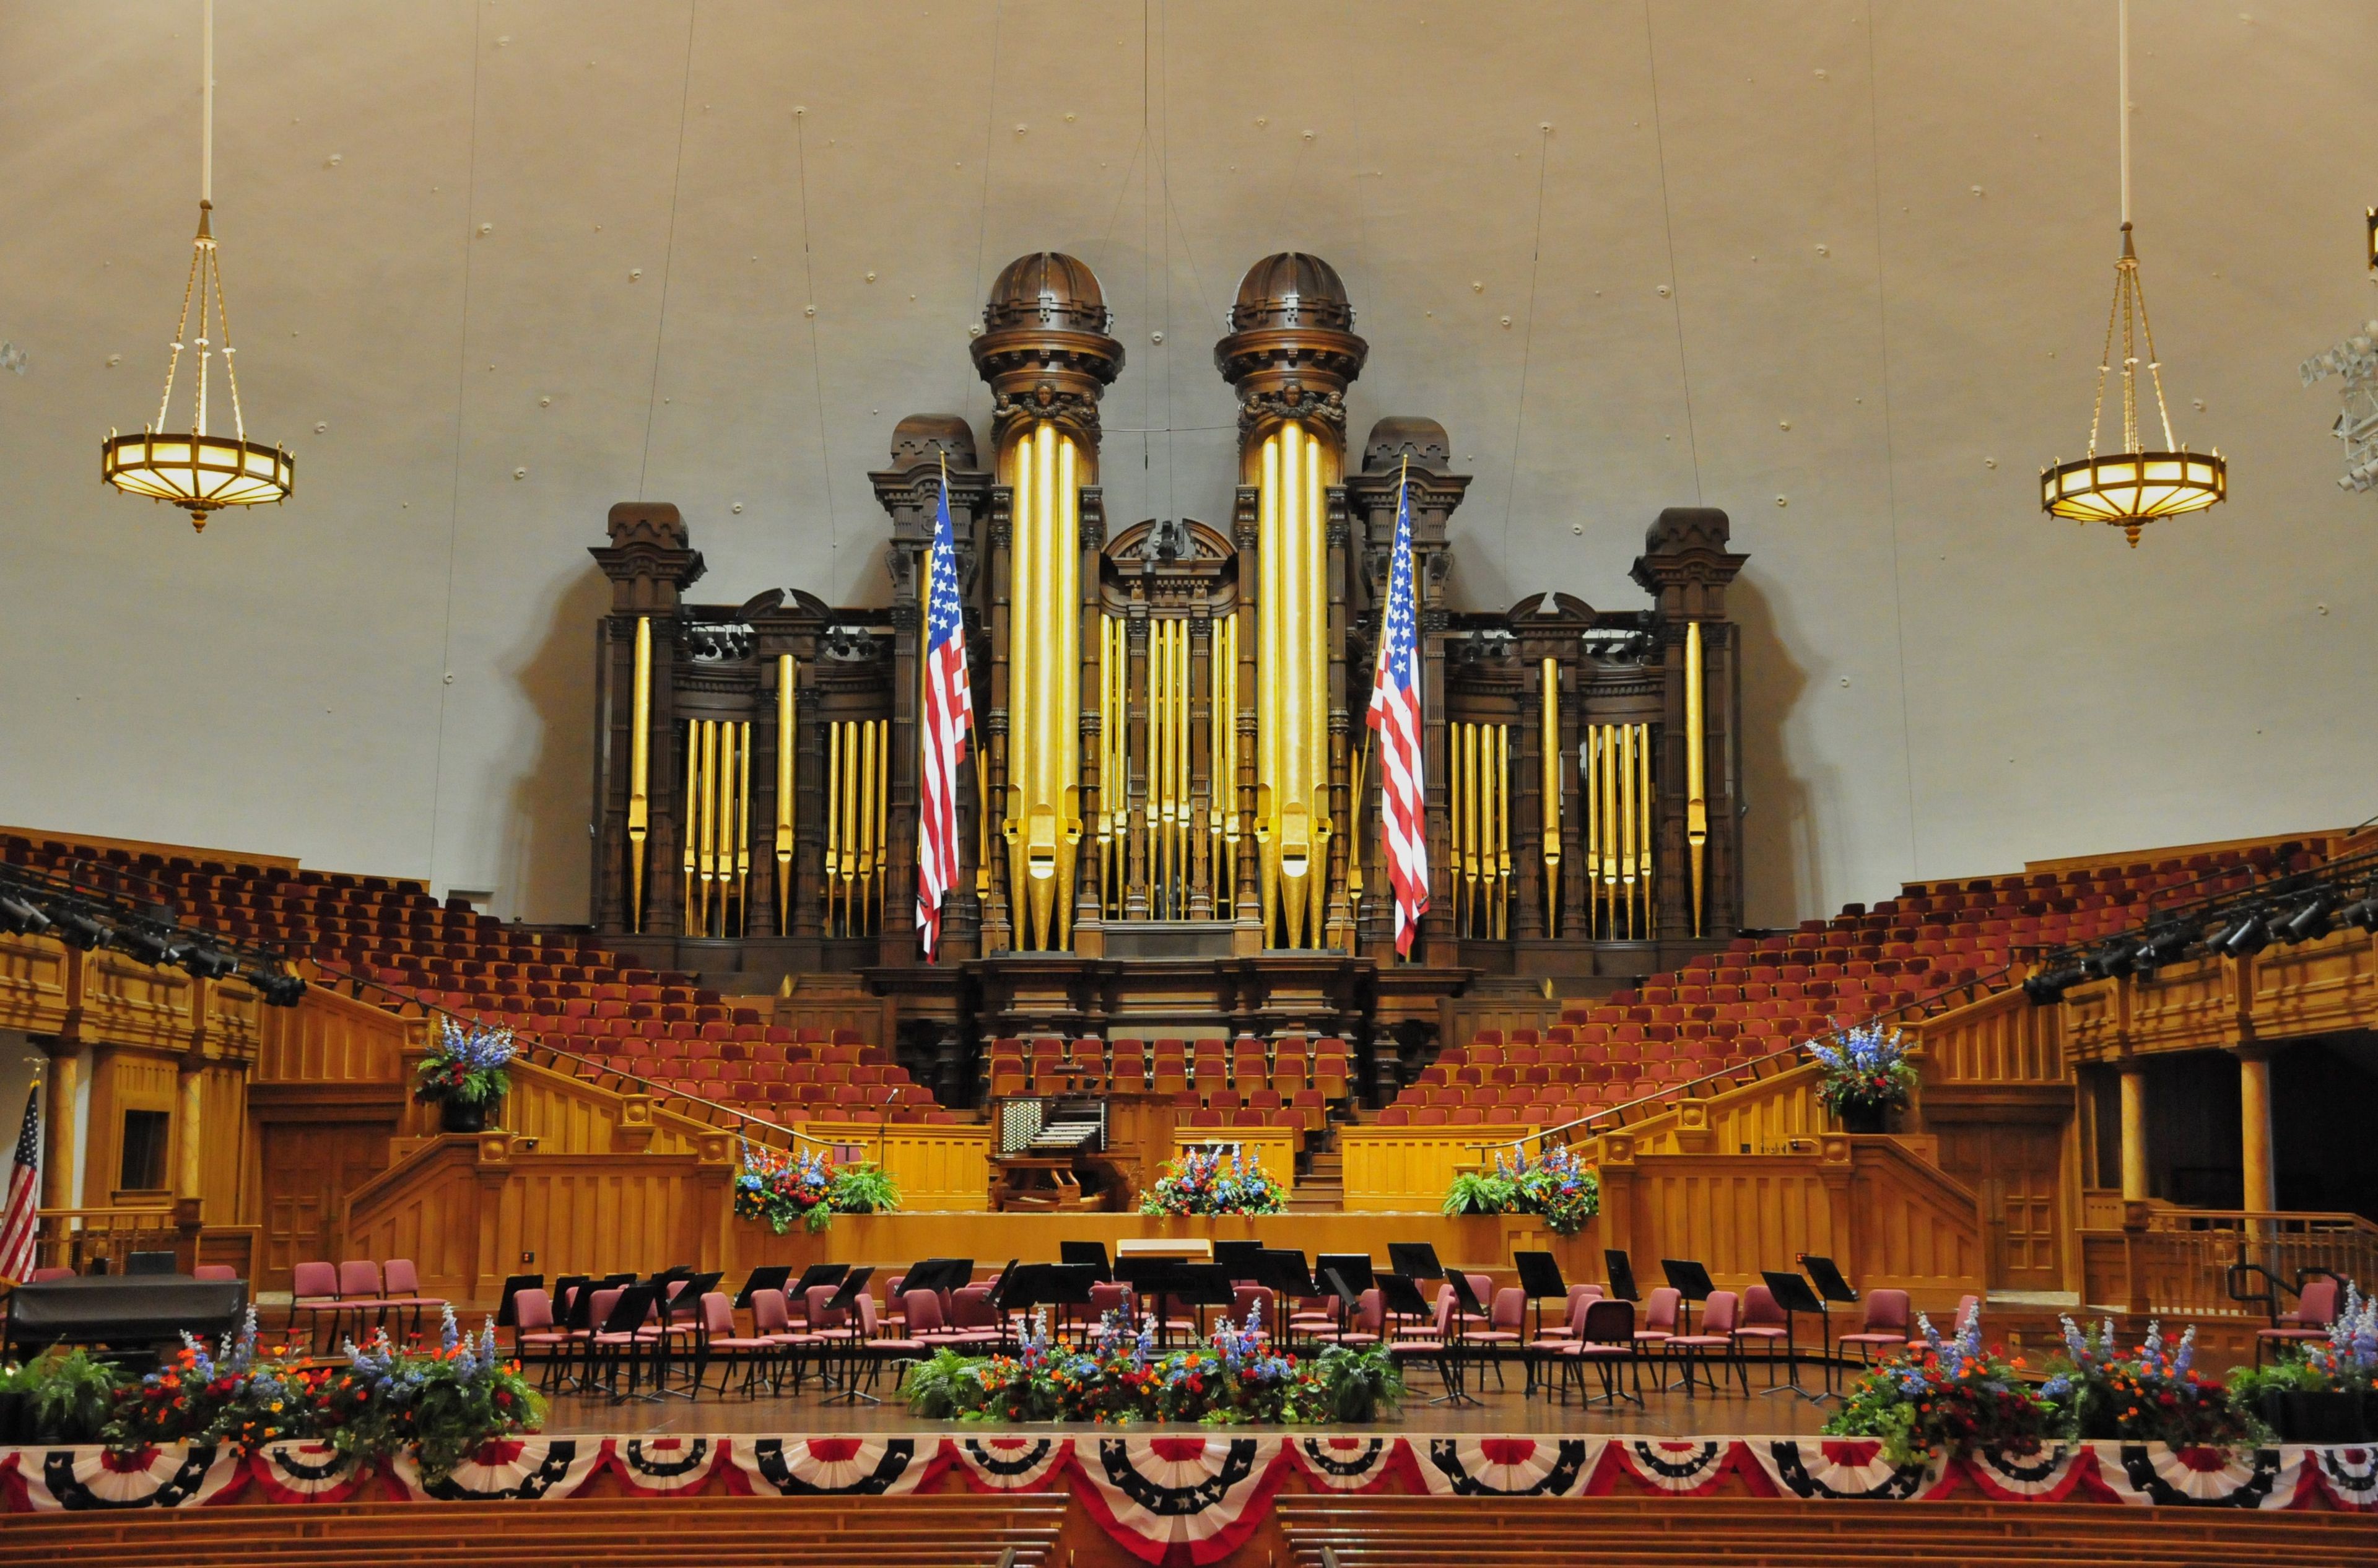 The interior of the Tabernacle on Temple Square decorated for the United States’ Independence Day.